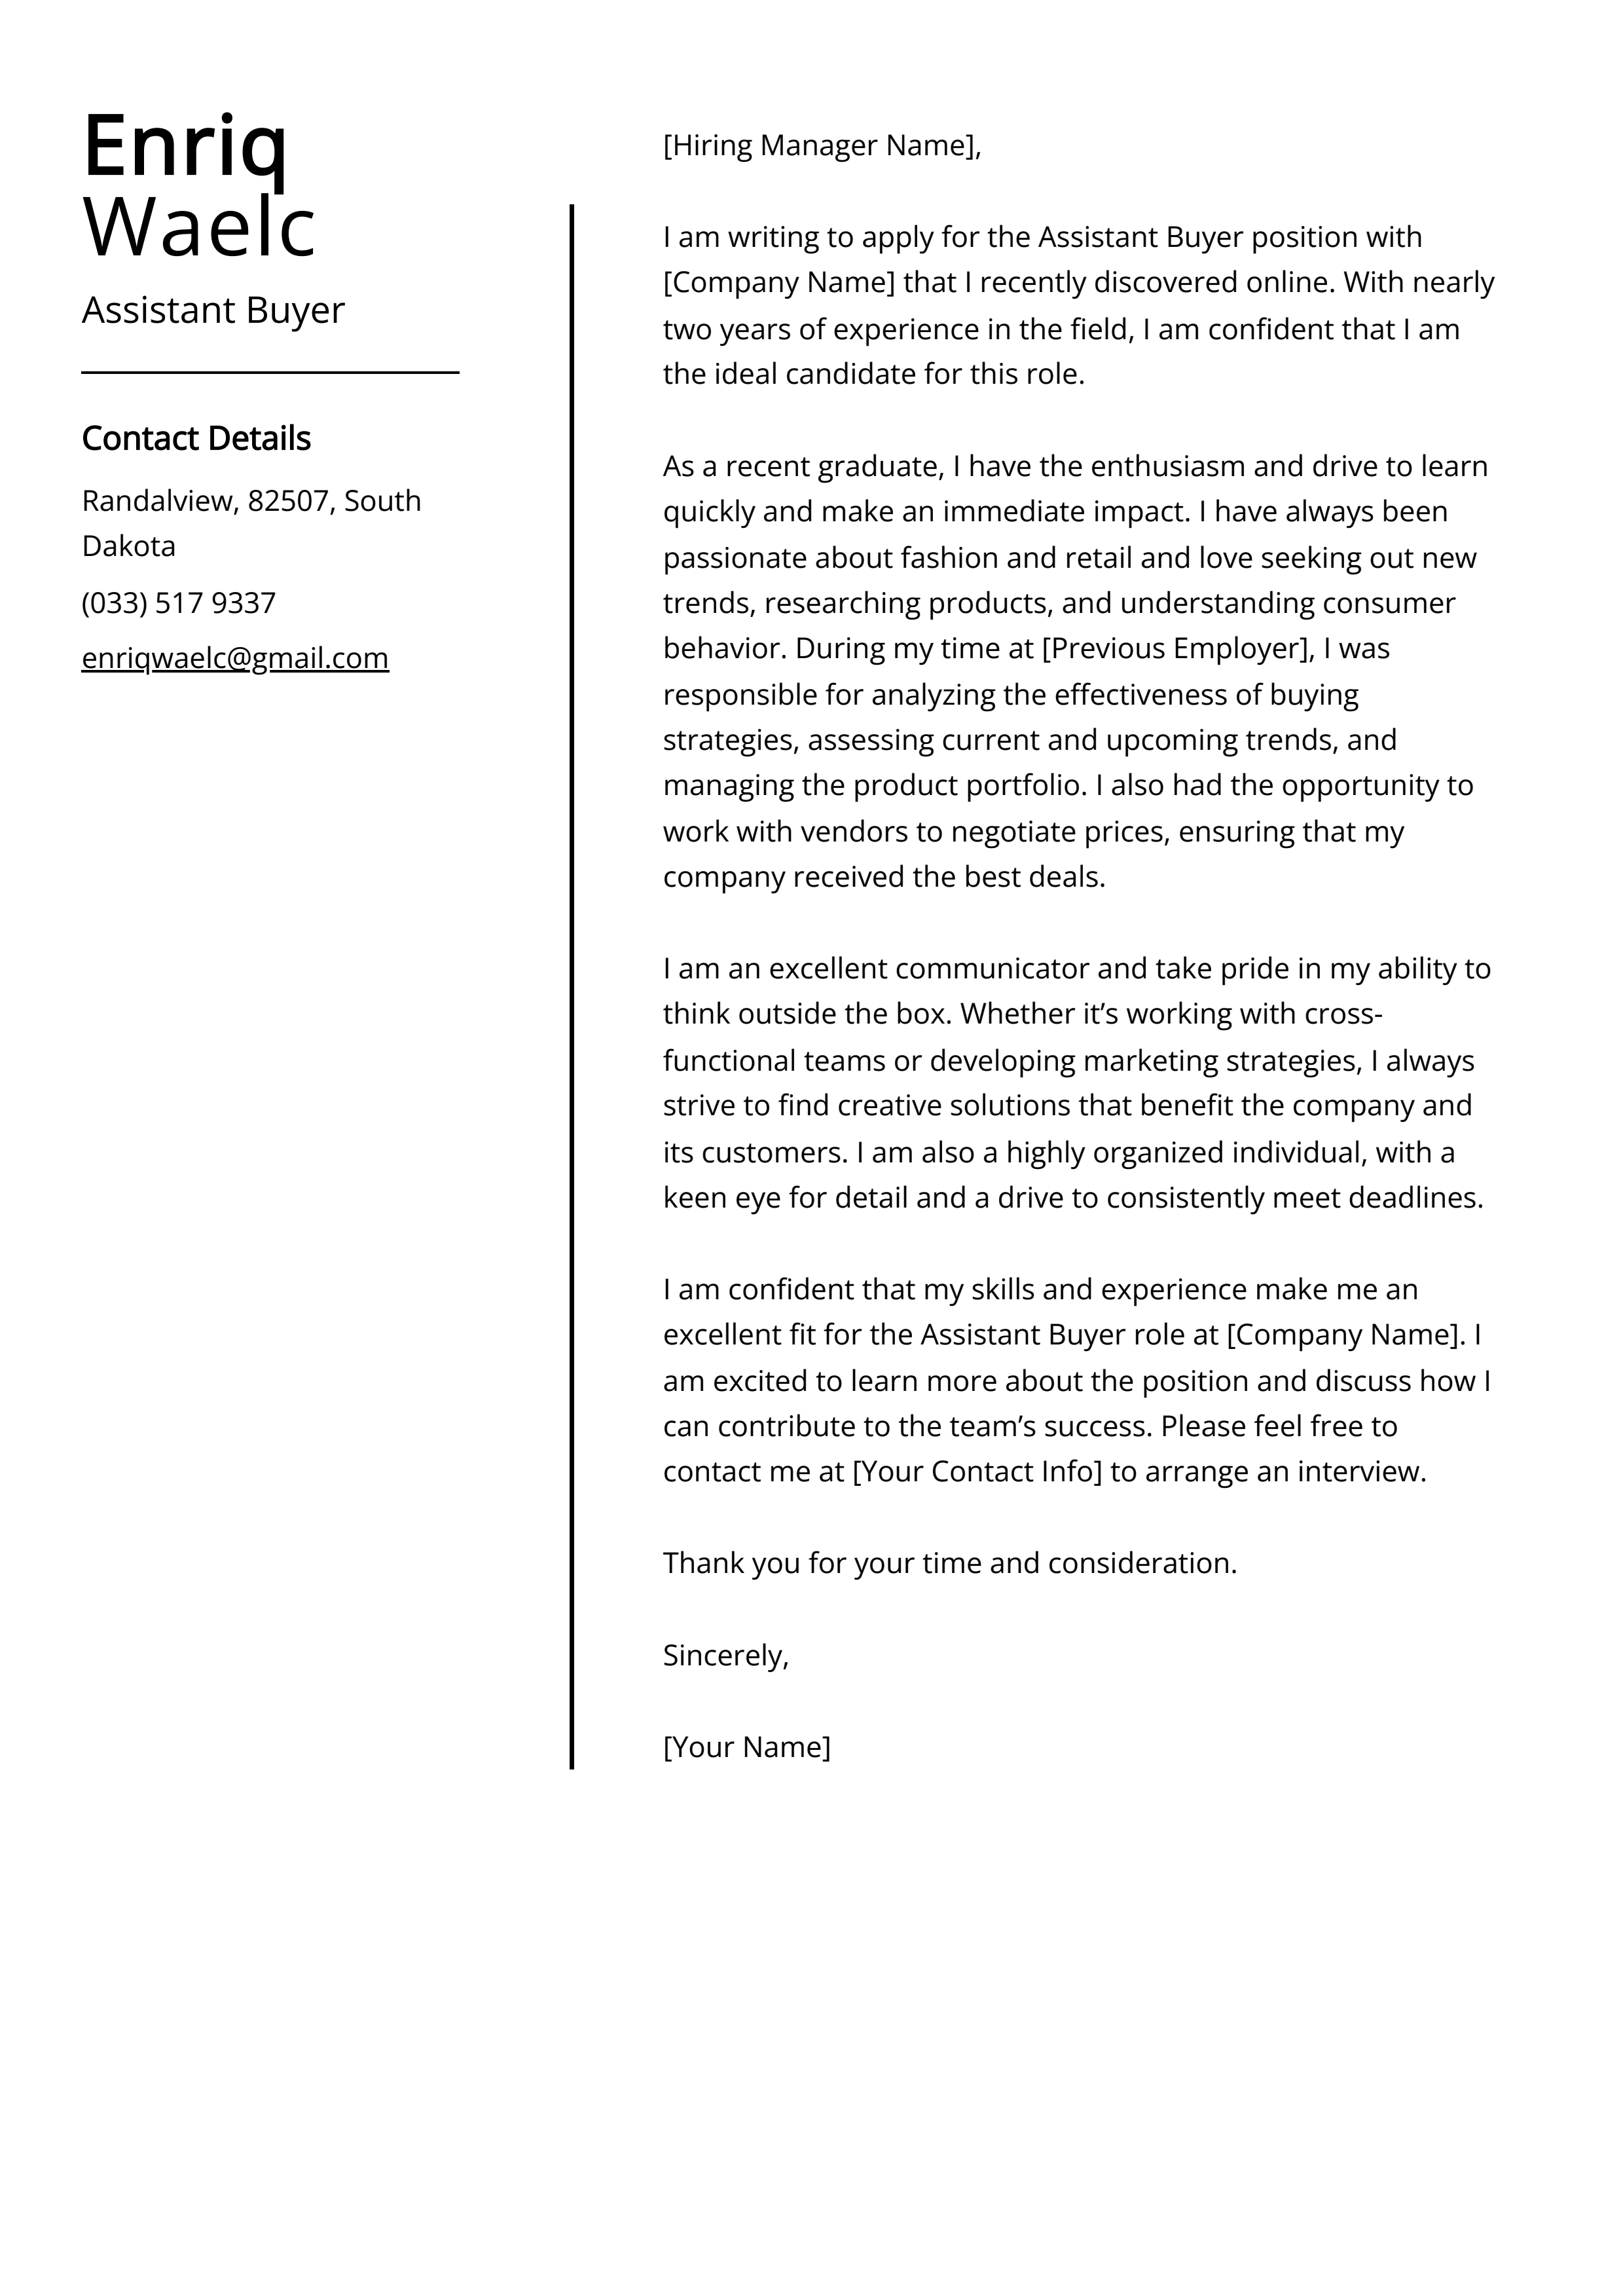 Assistant Buyer Cover Letter Example